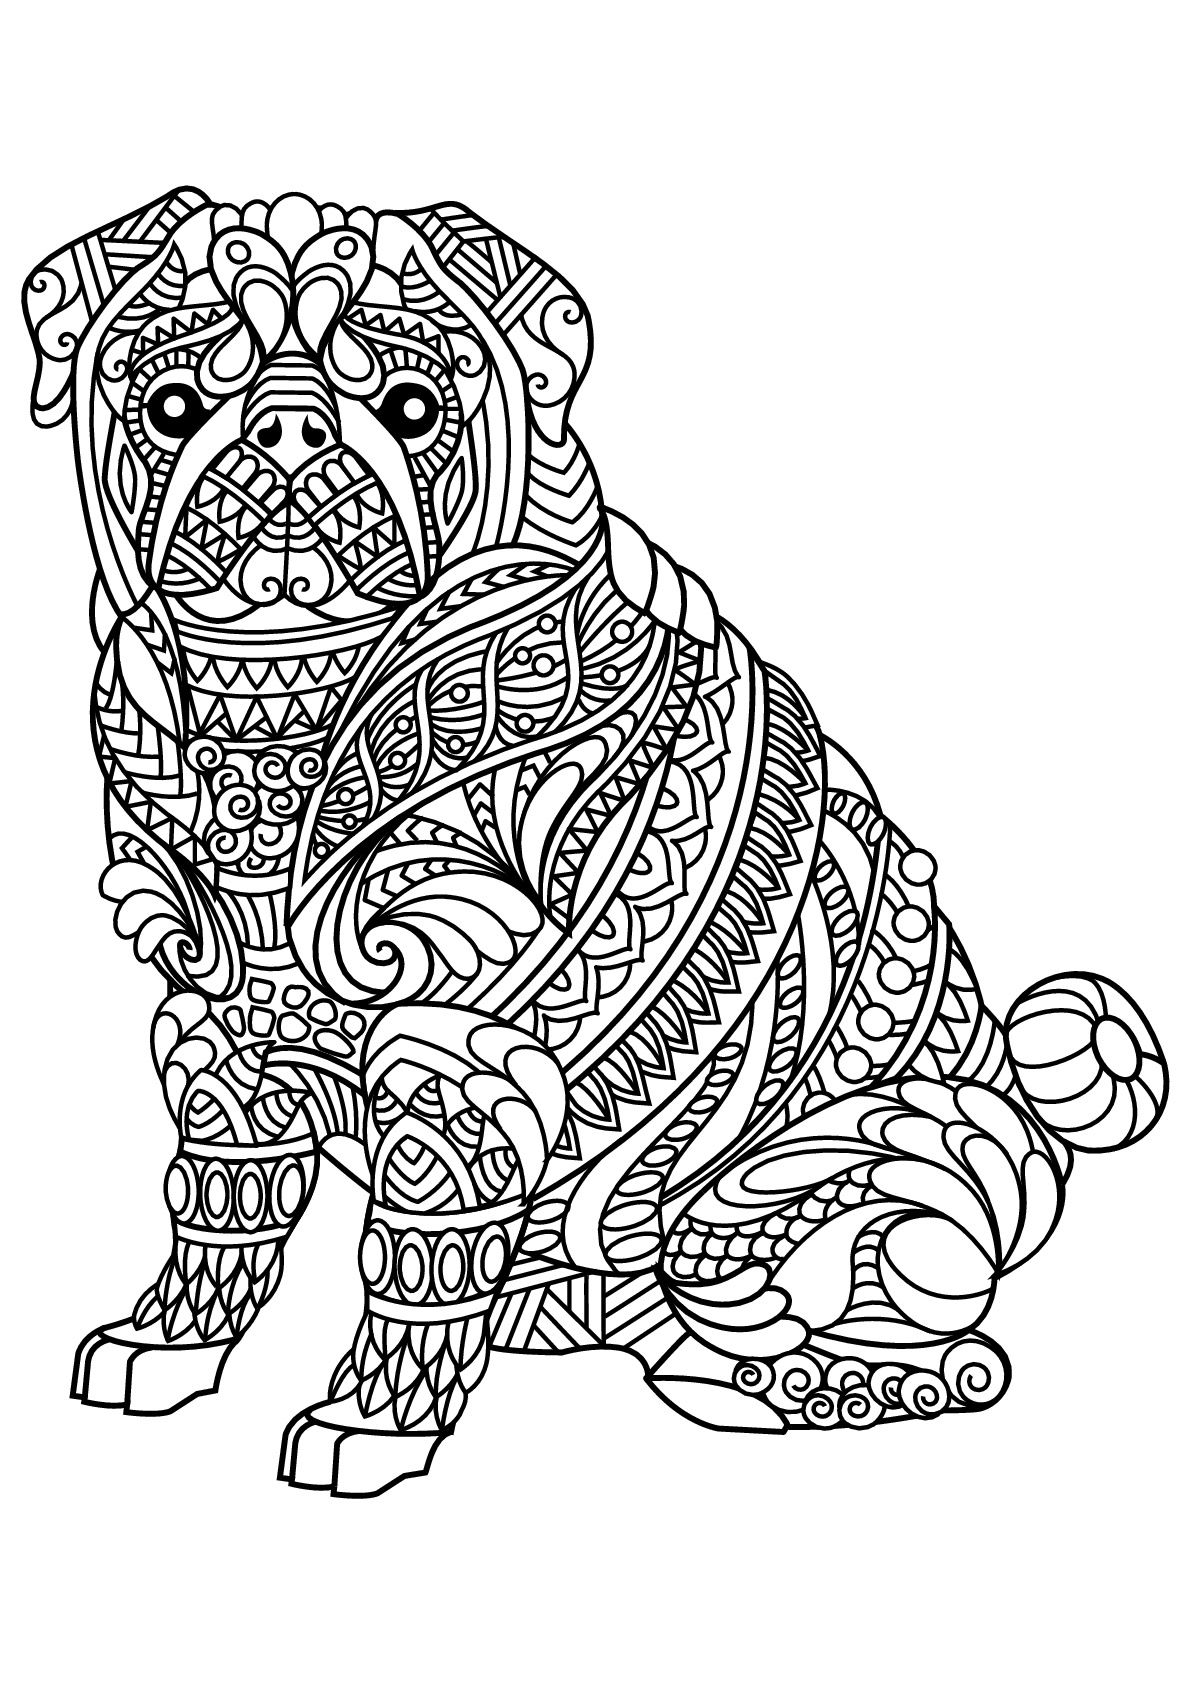 Download Dog to color for children - Dogs Kids Coloring Pages